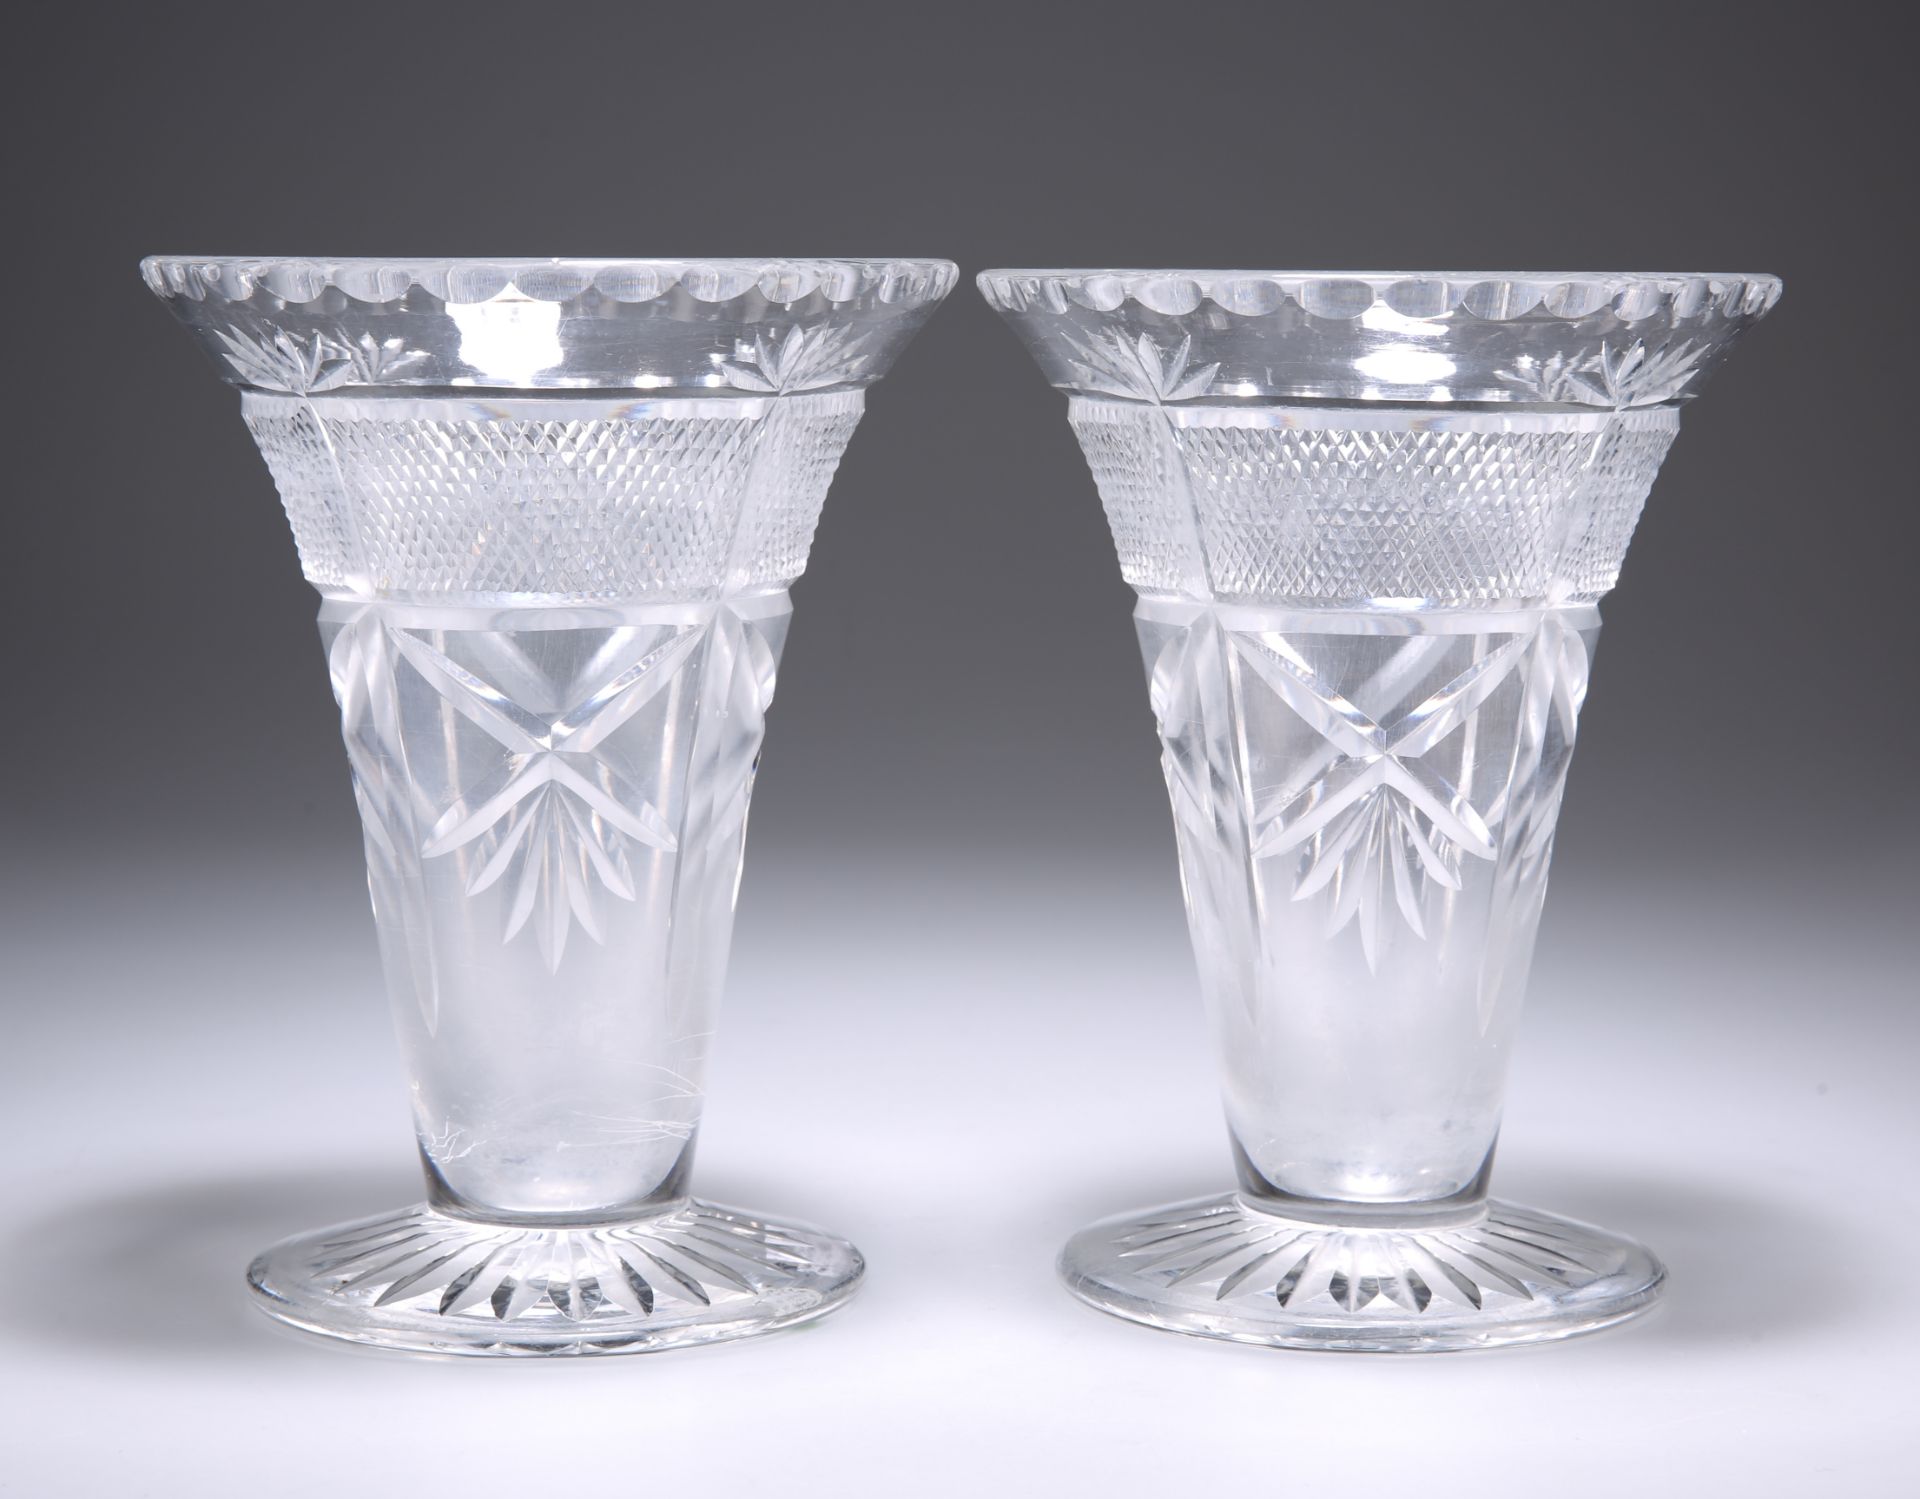 A PAIR OF VICTORIAN CUT-GLASS VASES